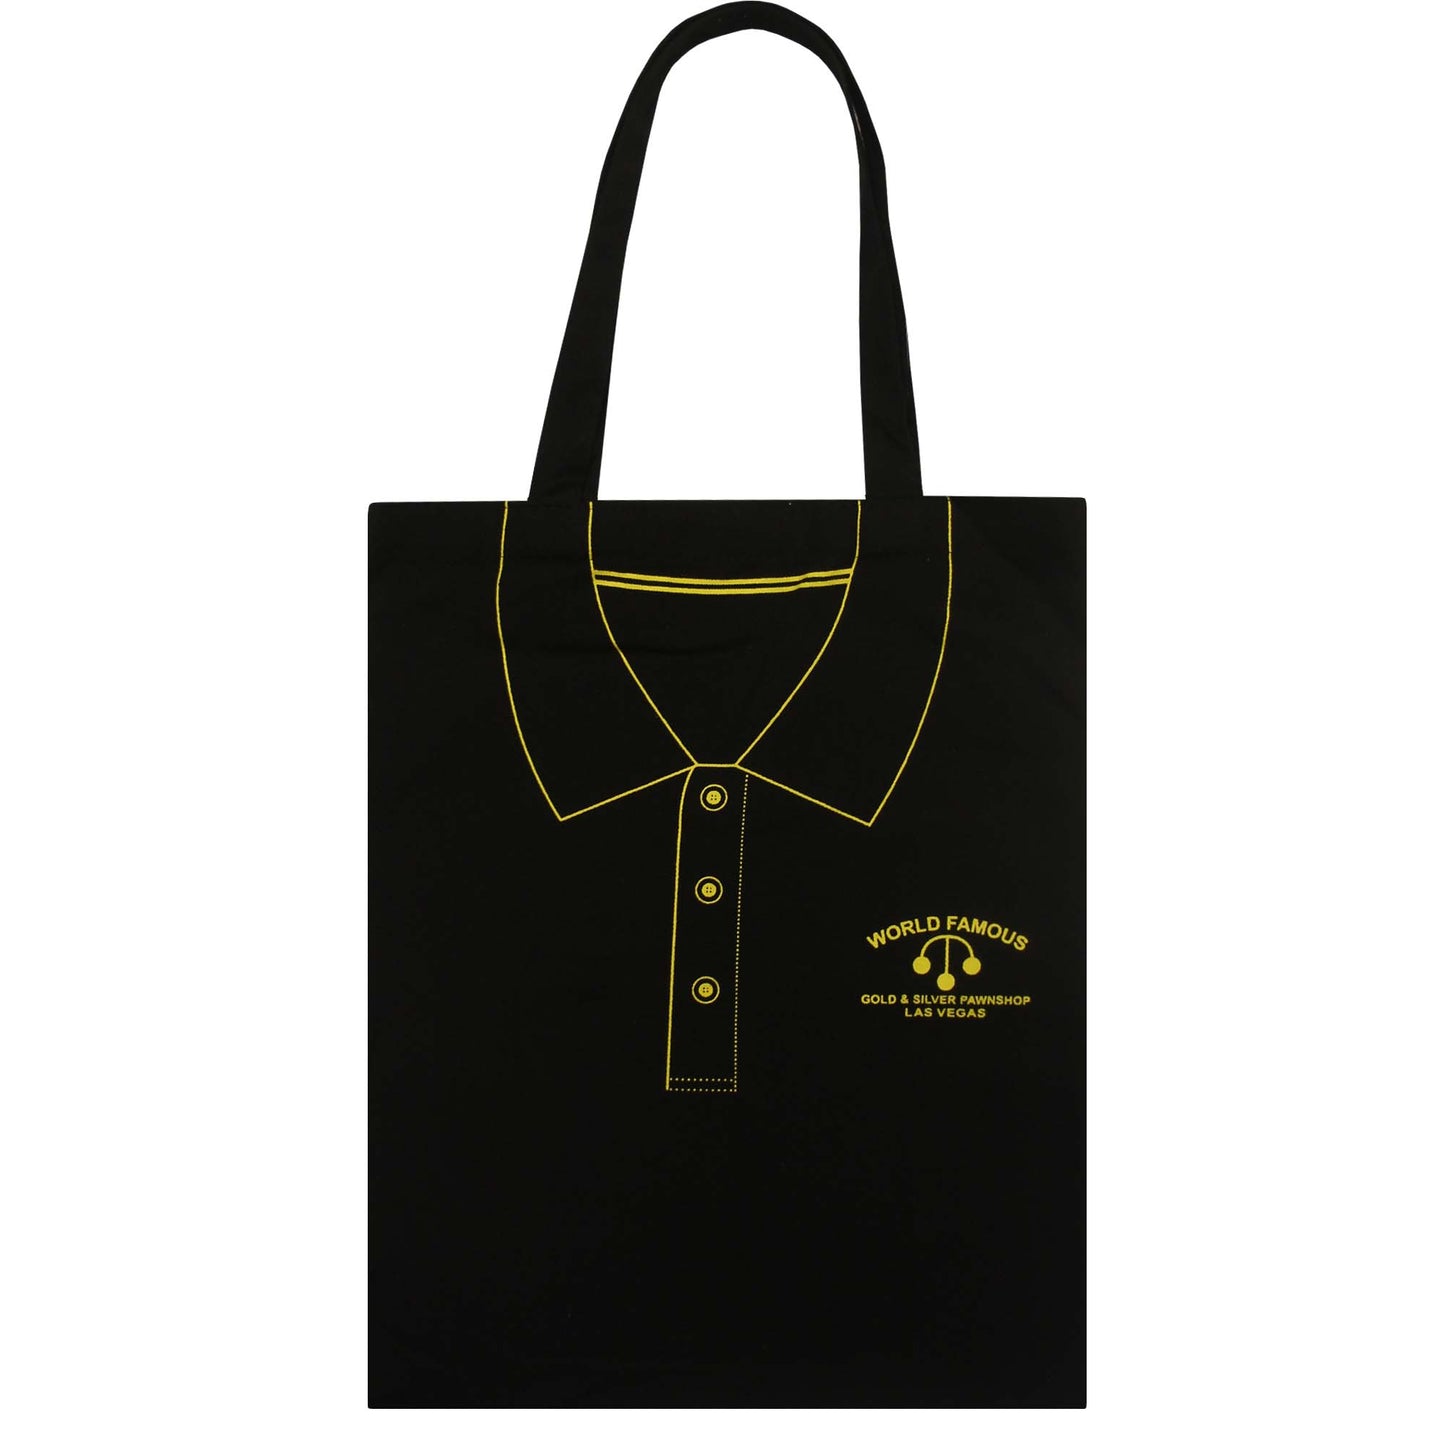 Gold & Silver Pawn Shop Polo Tote Bag ZOOM